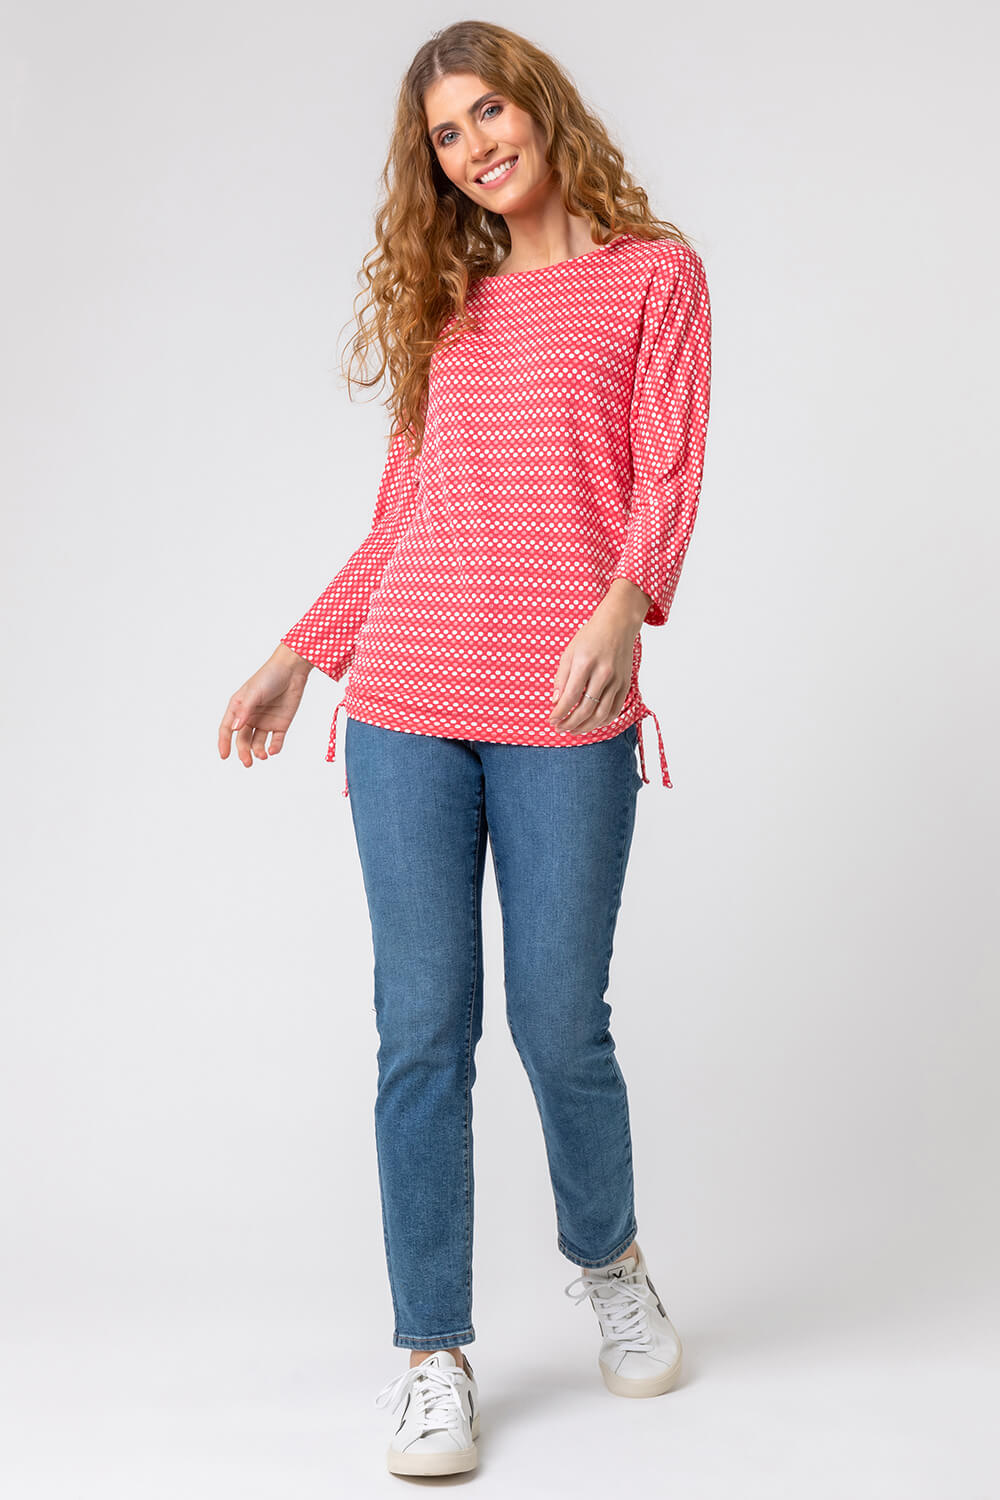 Red Textured Spot Print Stretch Top, Image 3 of 4